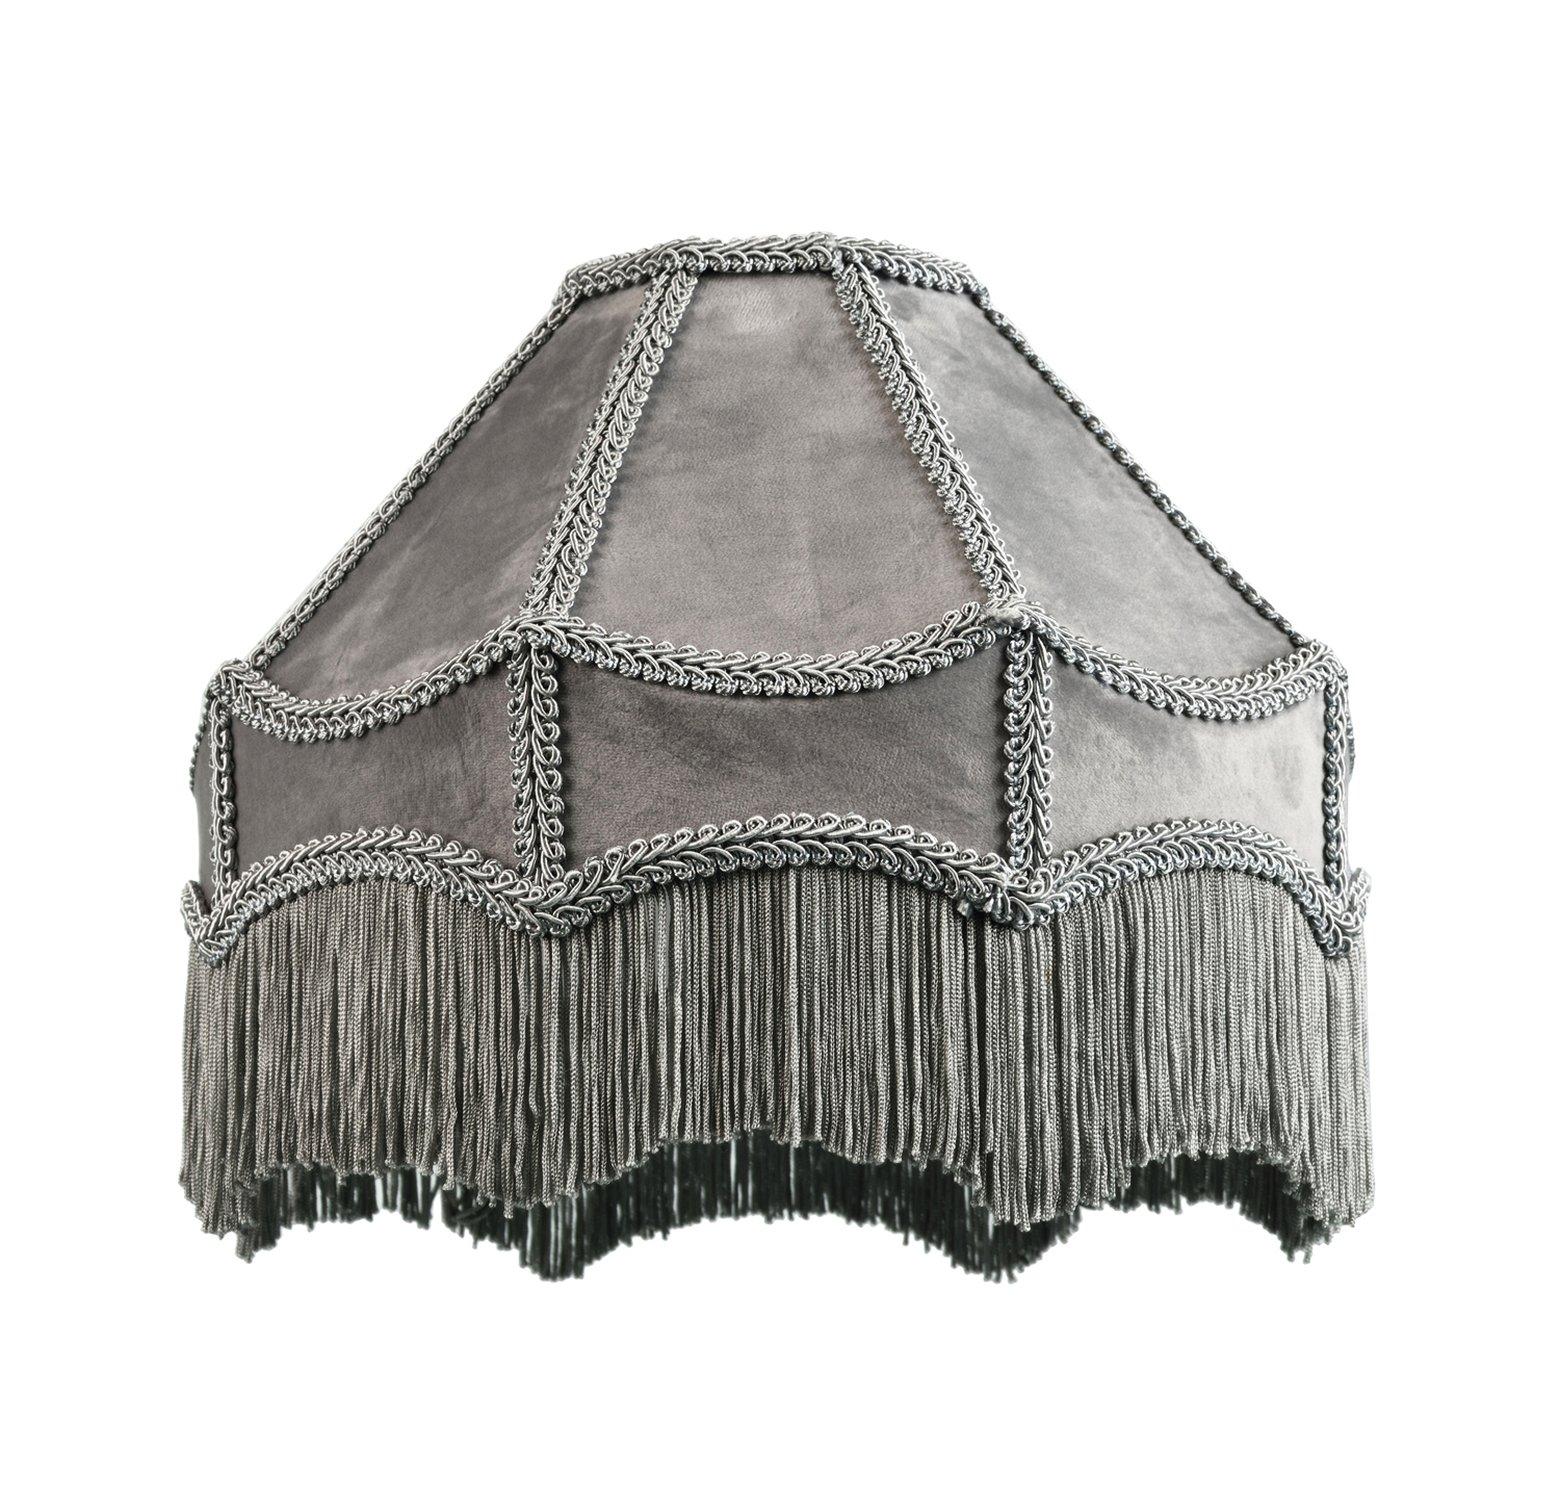 Traditional Victorian Empire Lamp Shade in Velvet with Hanging Tassels